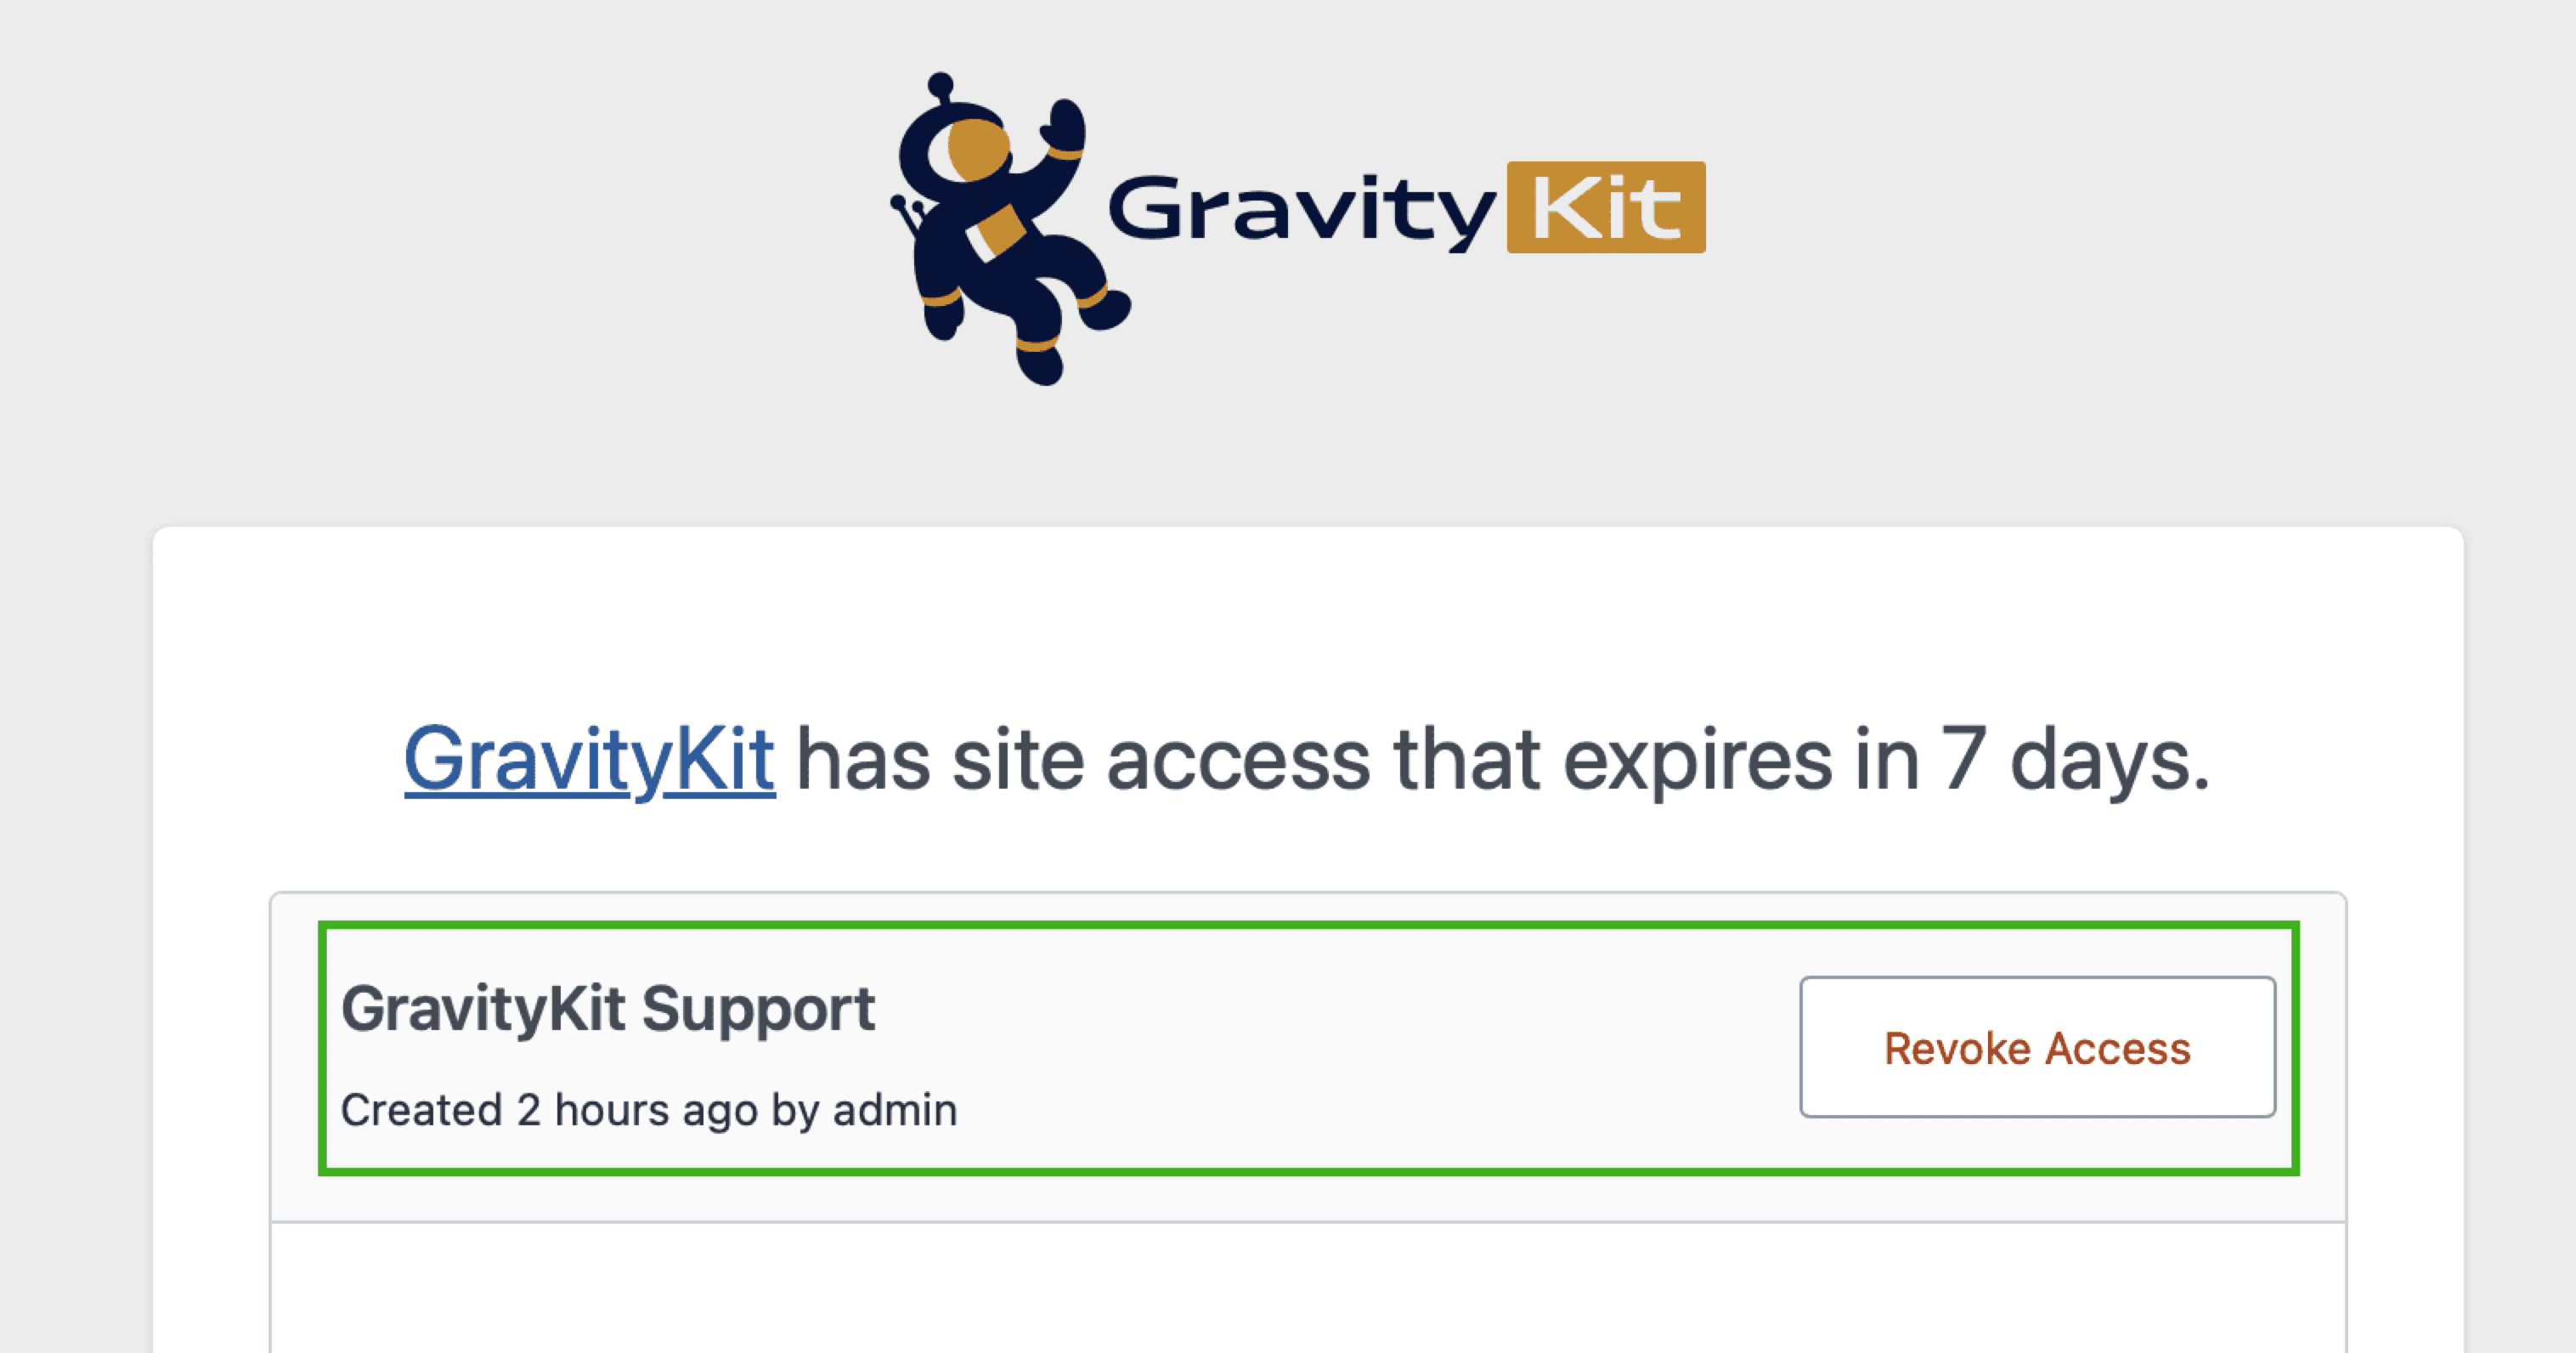 A screenshot of the Grant Support Access form with the placeholder parts highlighted.